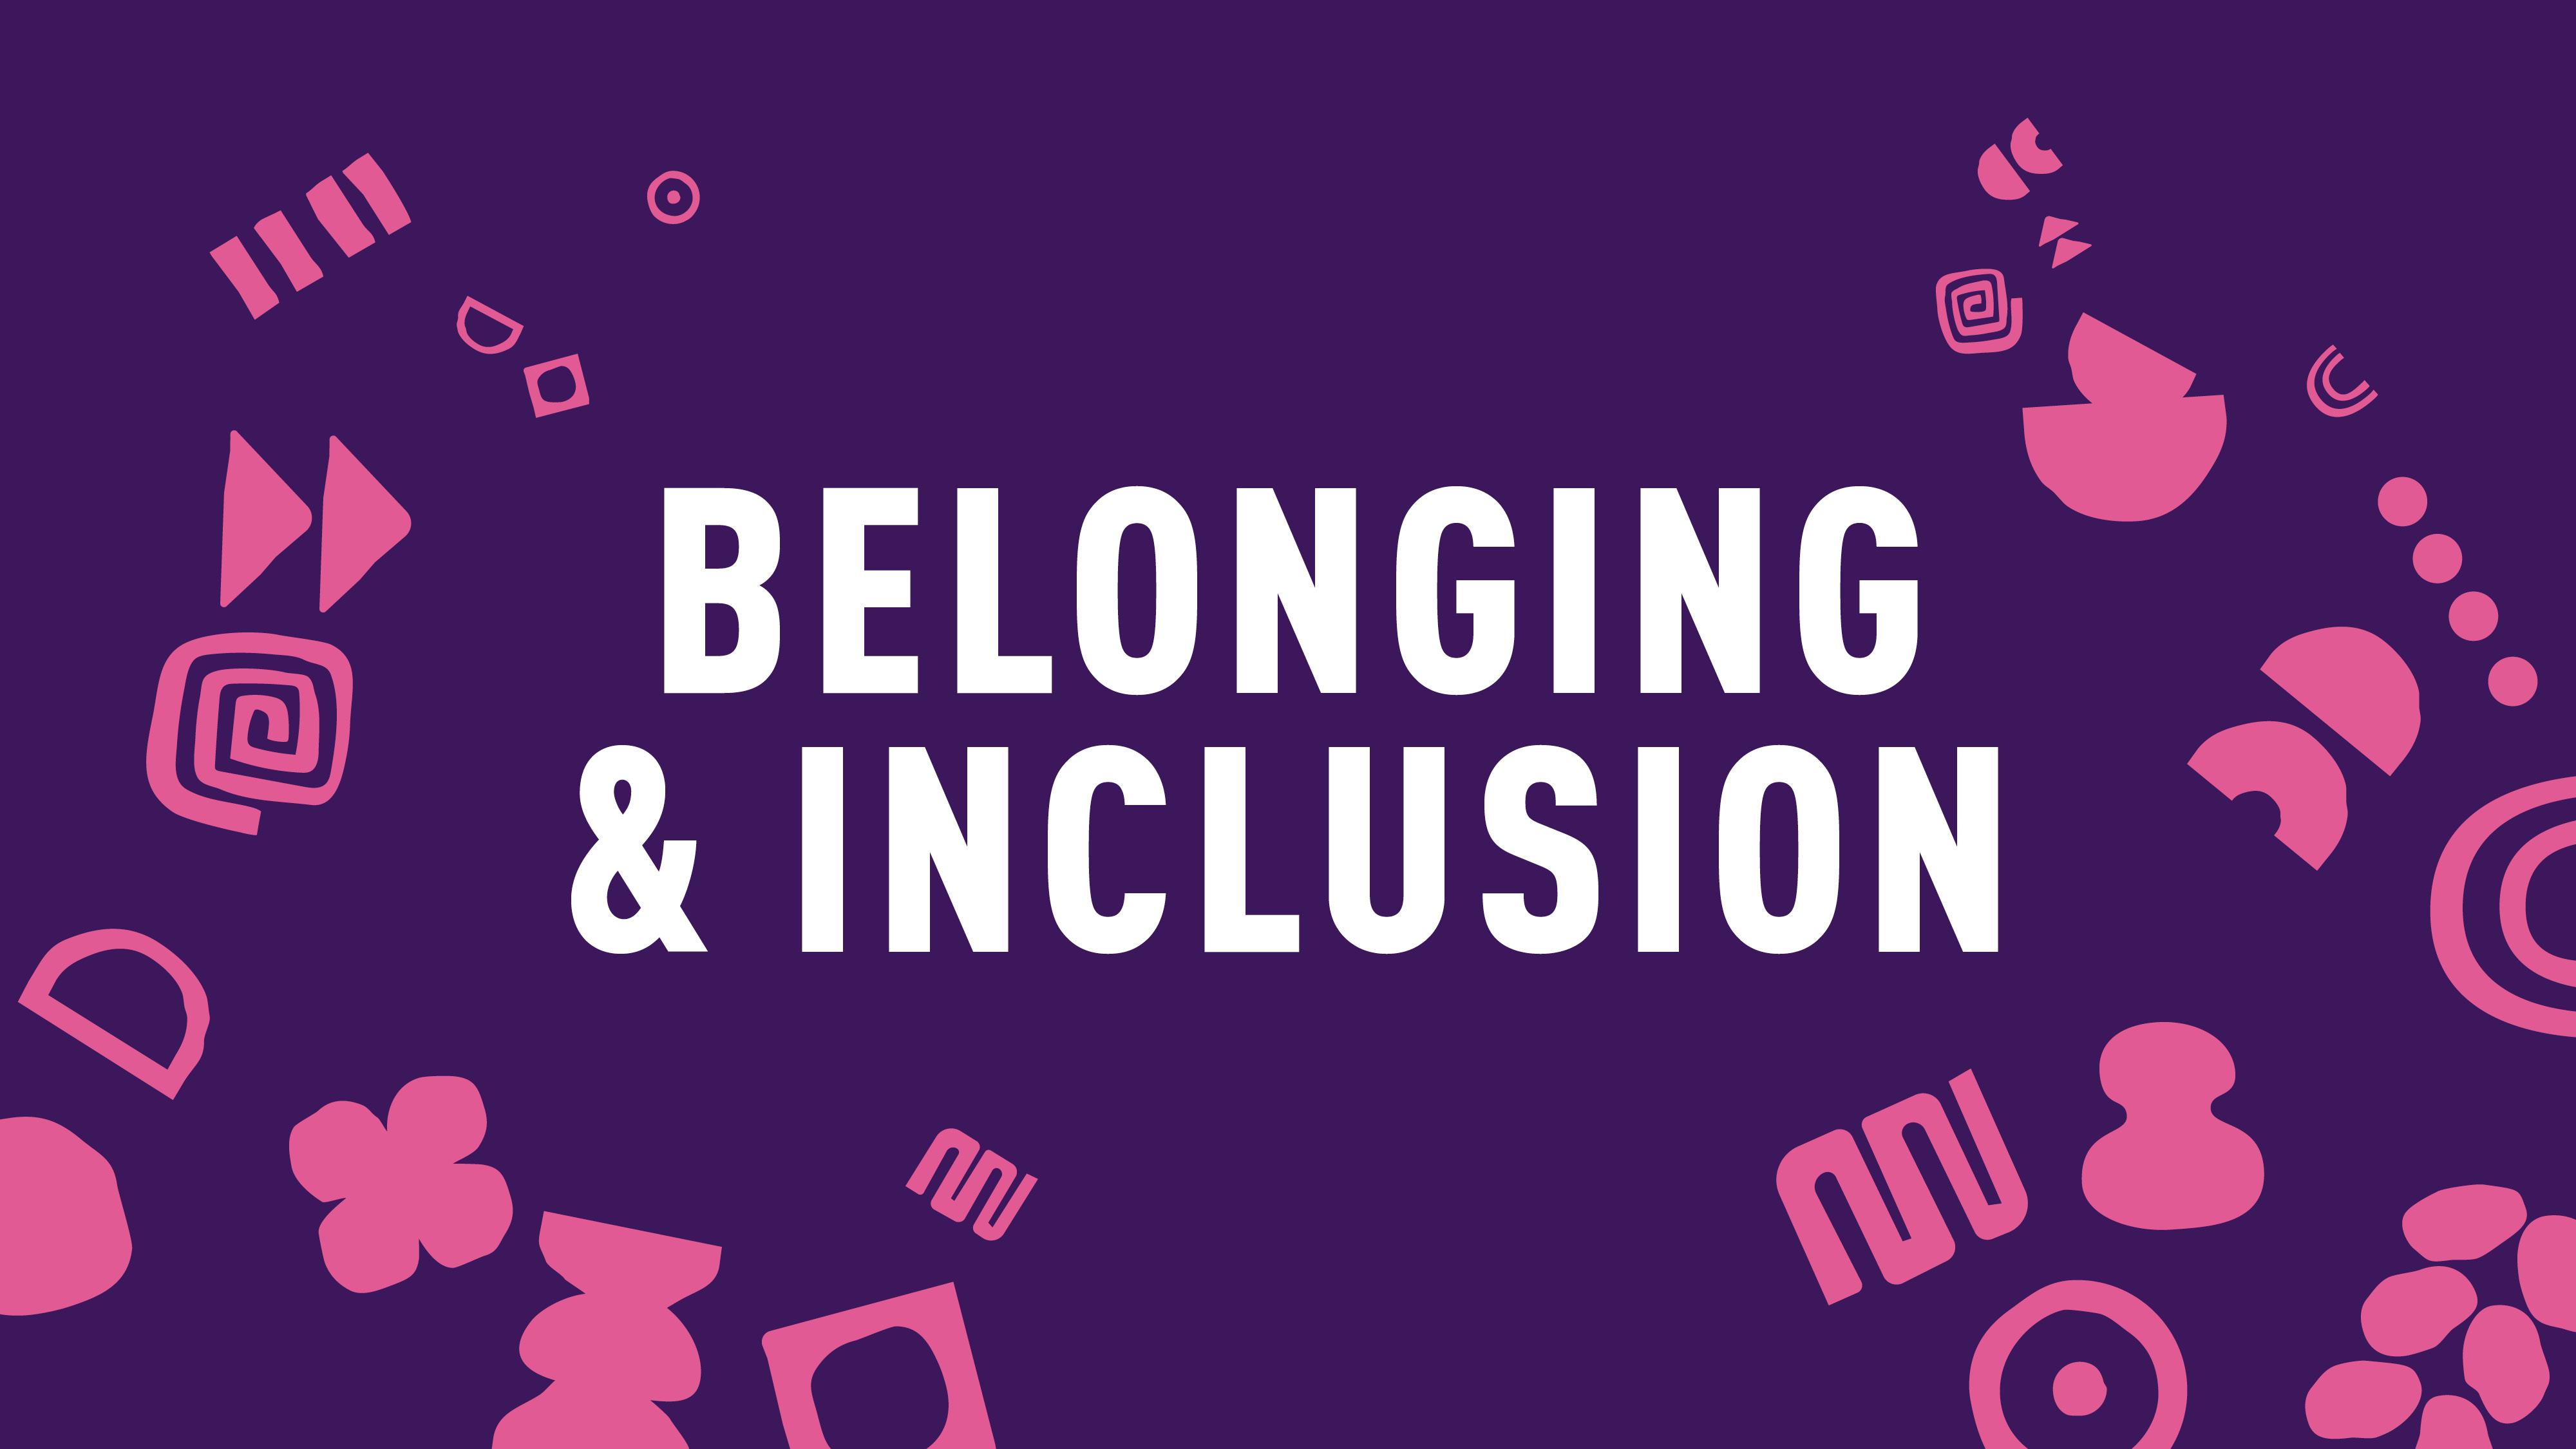 Purple background with pink icons and white letters that say 'Belonging and Inclusion' in the centre